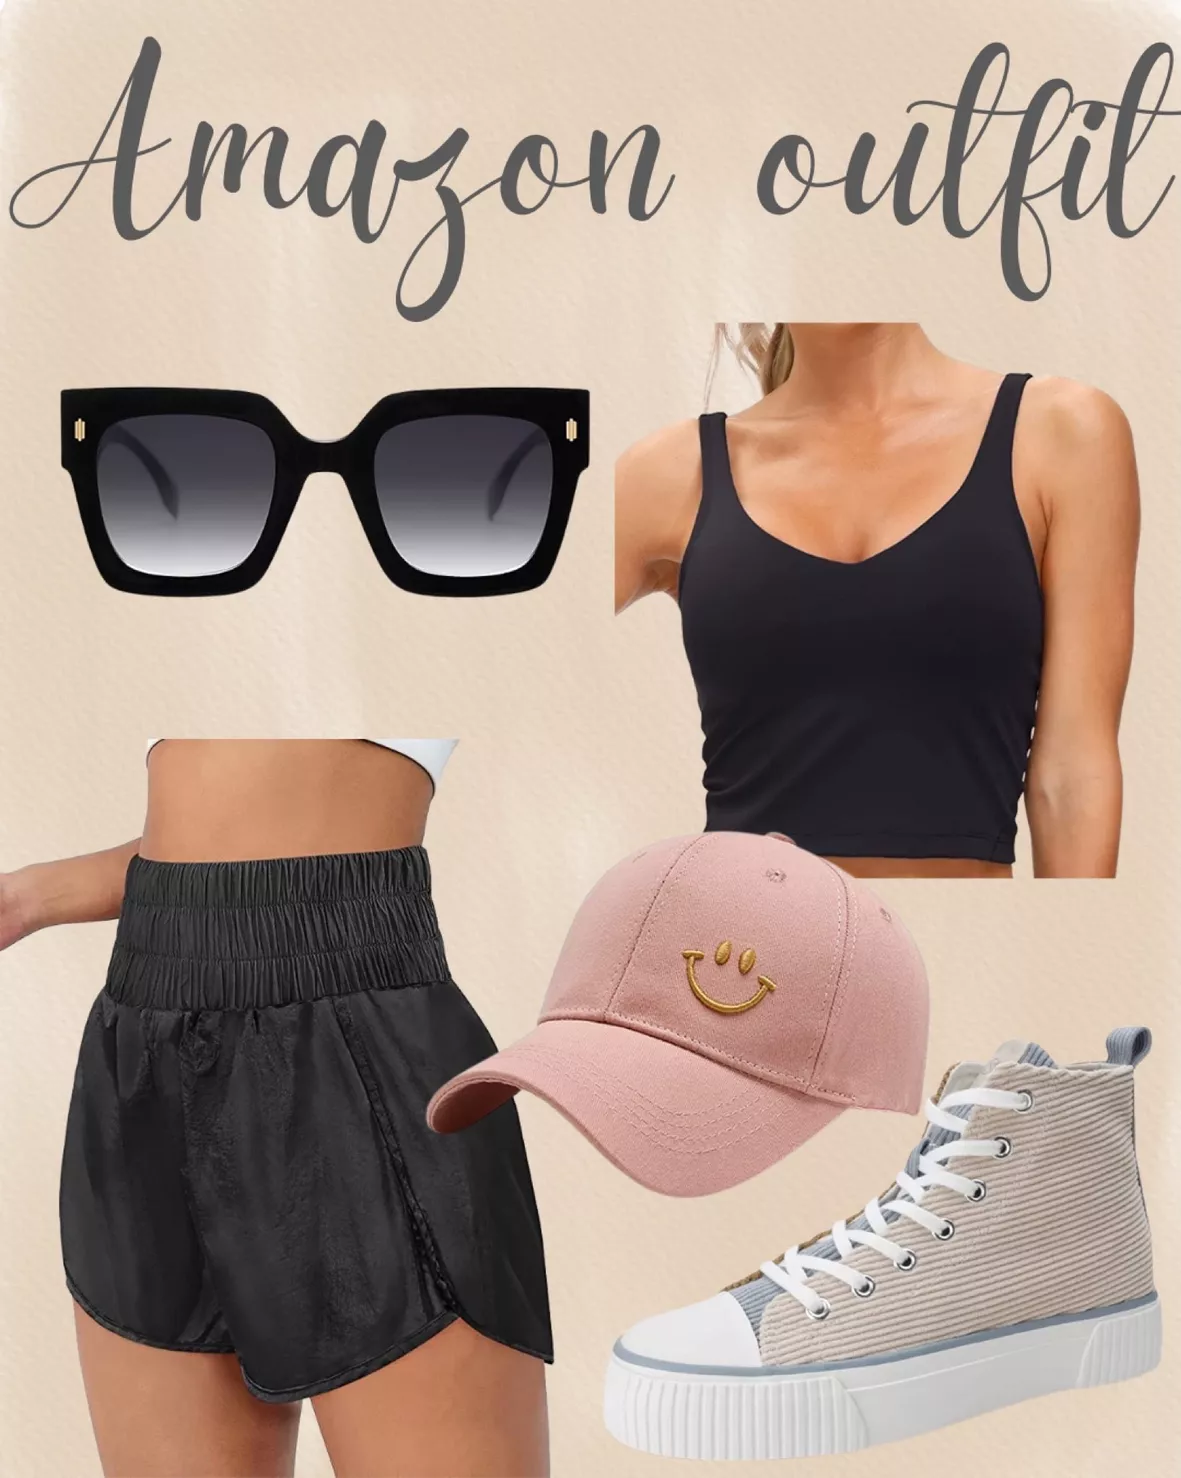 Athletic Outfit Ideas for College Girls